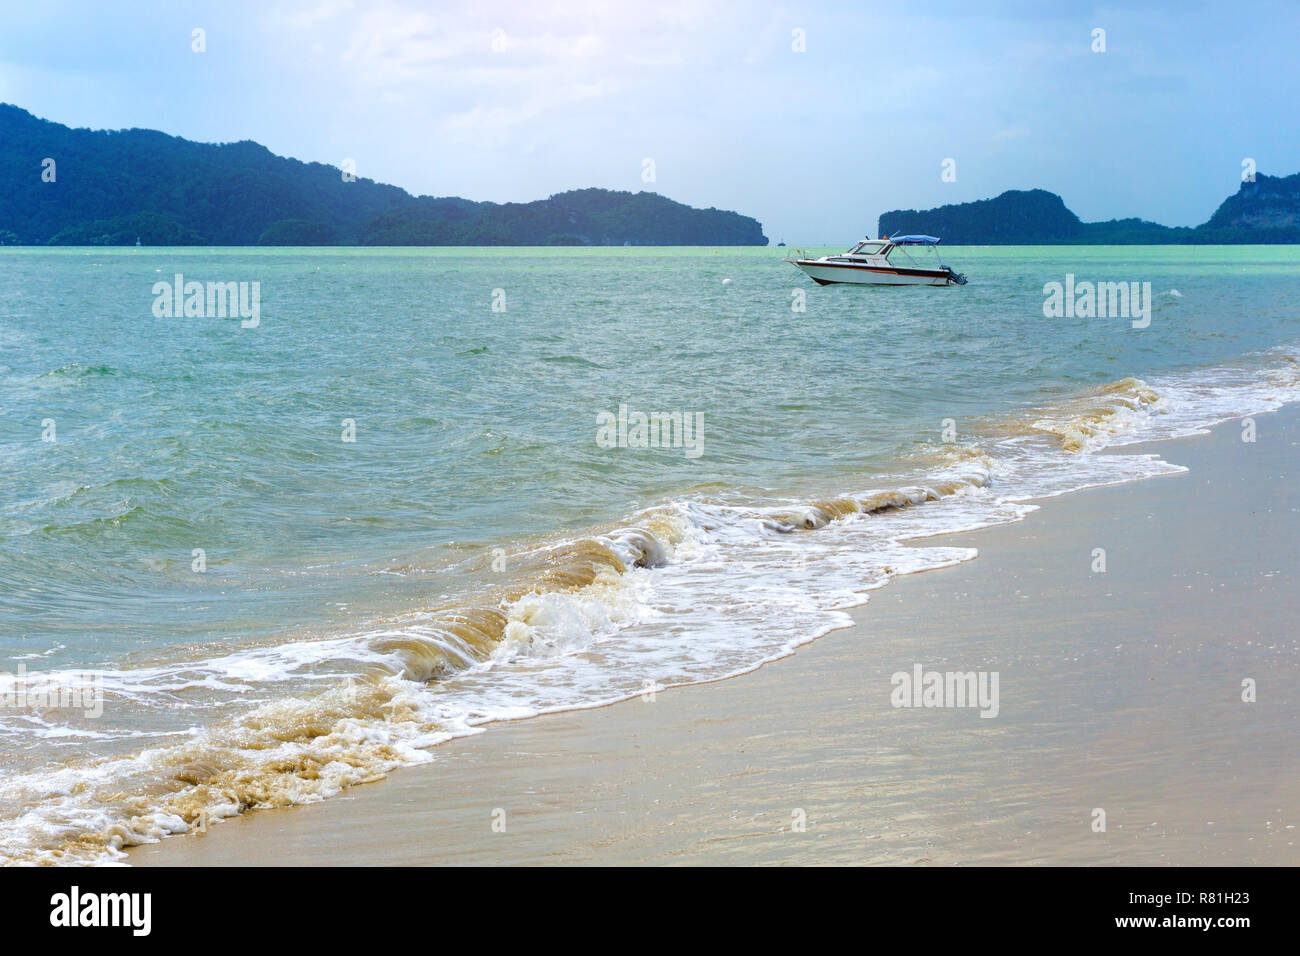 Boat on blue water and white sand beach in thailand sea, Satun Province. Stock Photo